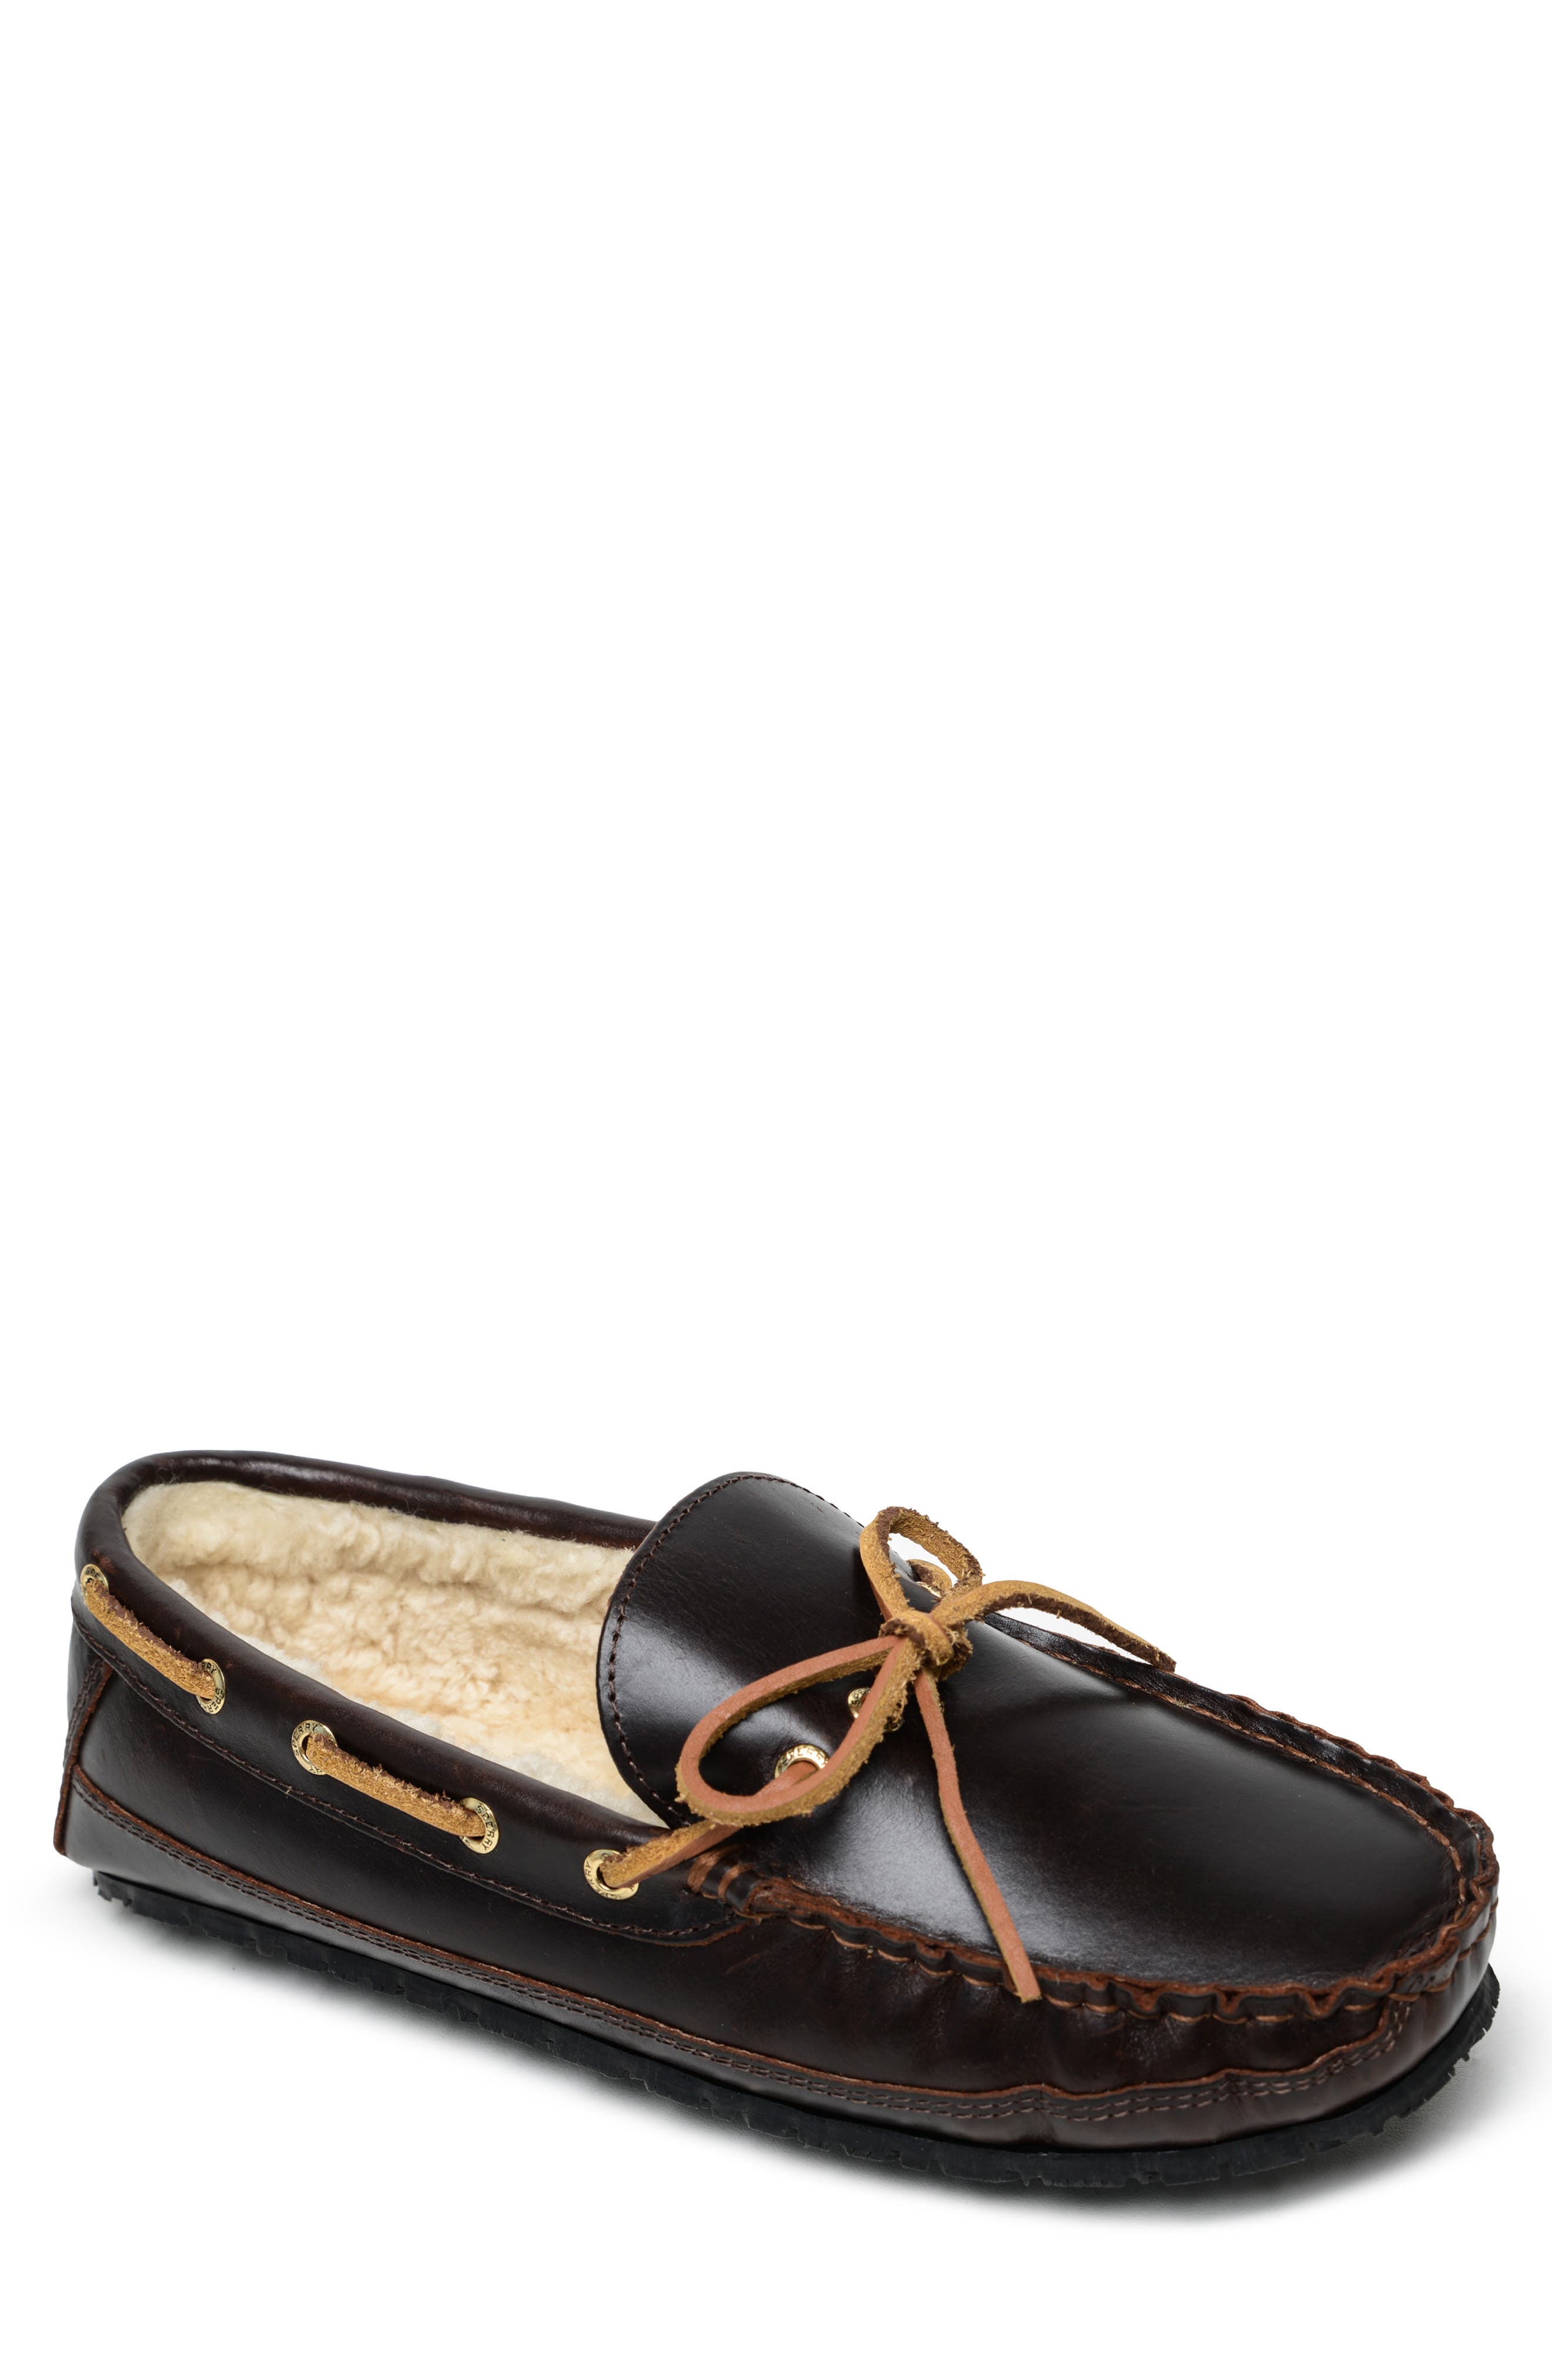 sperry gold cup nordstrom rack